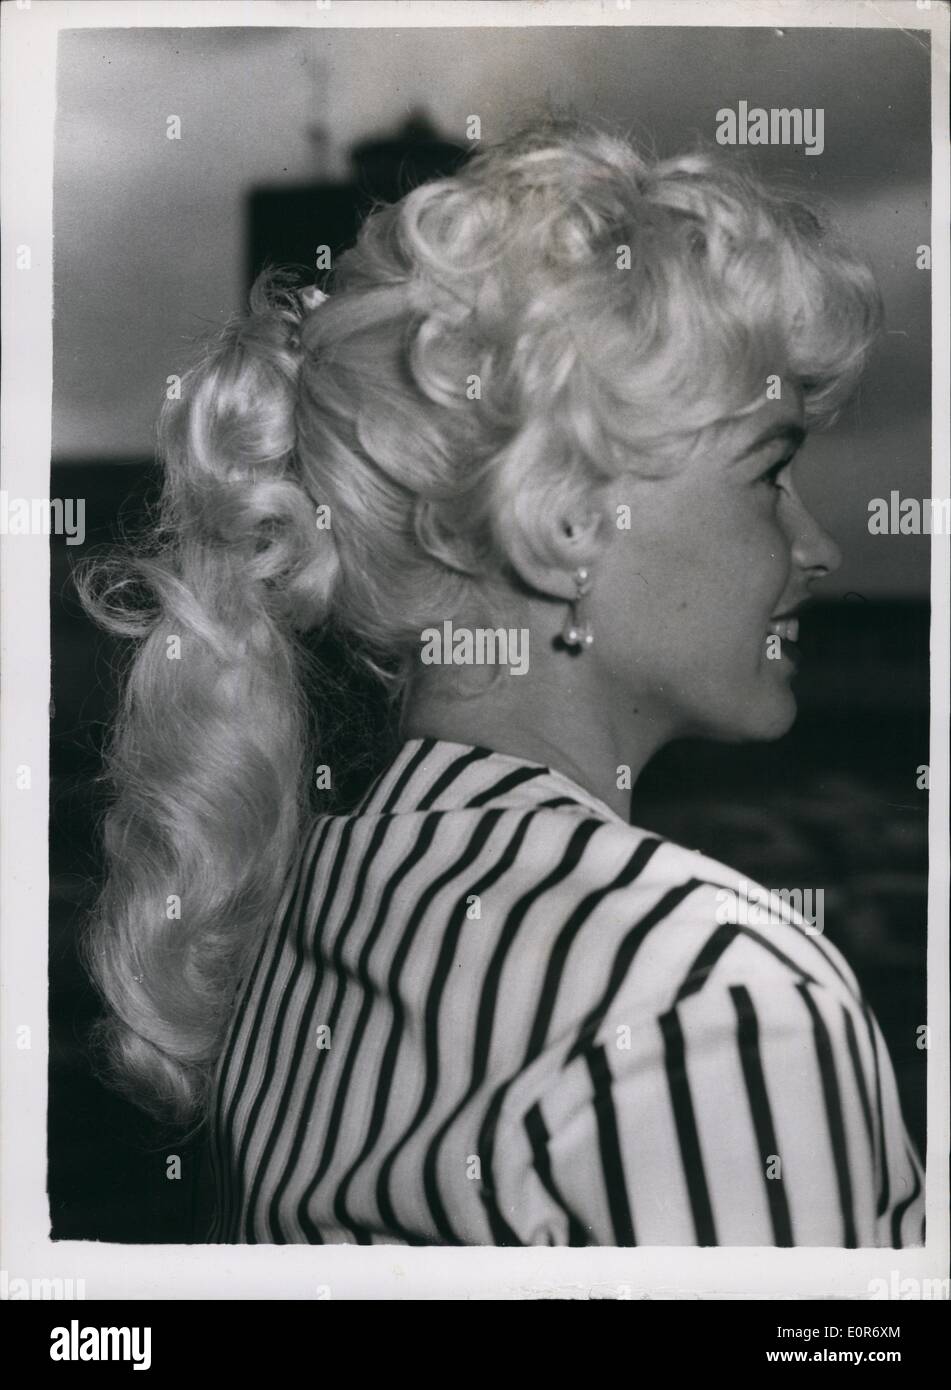 May 05, 1958 - Jayne Mansfield and Husband Fly to Cannes film Festival: Leaving London by air today was American film star Jayne Mansfield who is flying to Cannes to attend the film festival. She was accompanied by her husband Micky Hapgitay. Photo shows Jayne Mansfield - with her ''Horsey'' hair style - as she left London airport this morning. Stock Photo